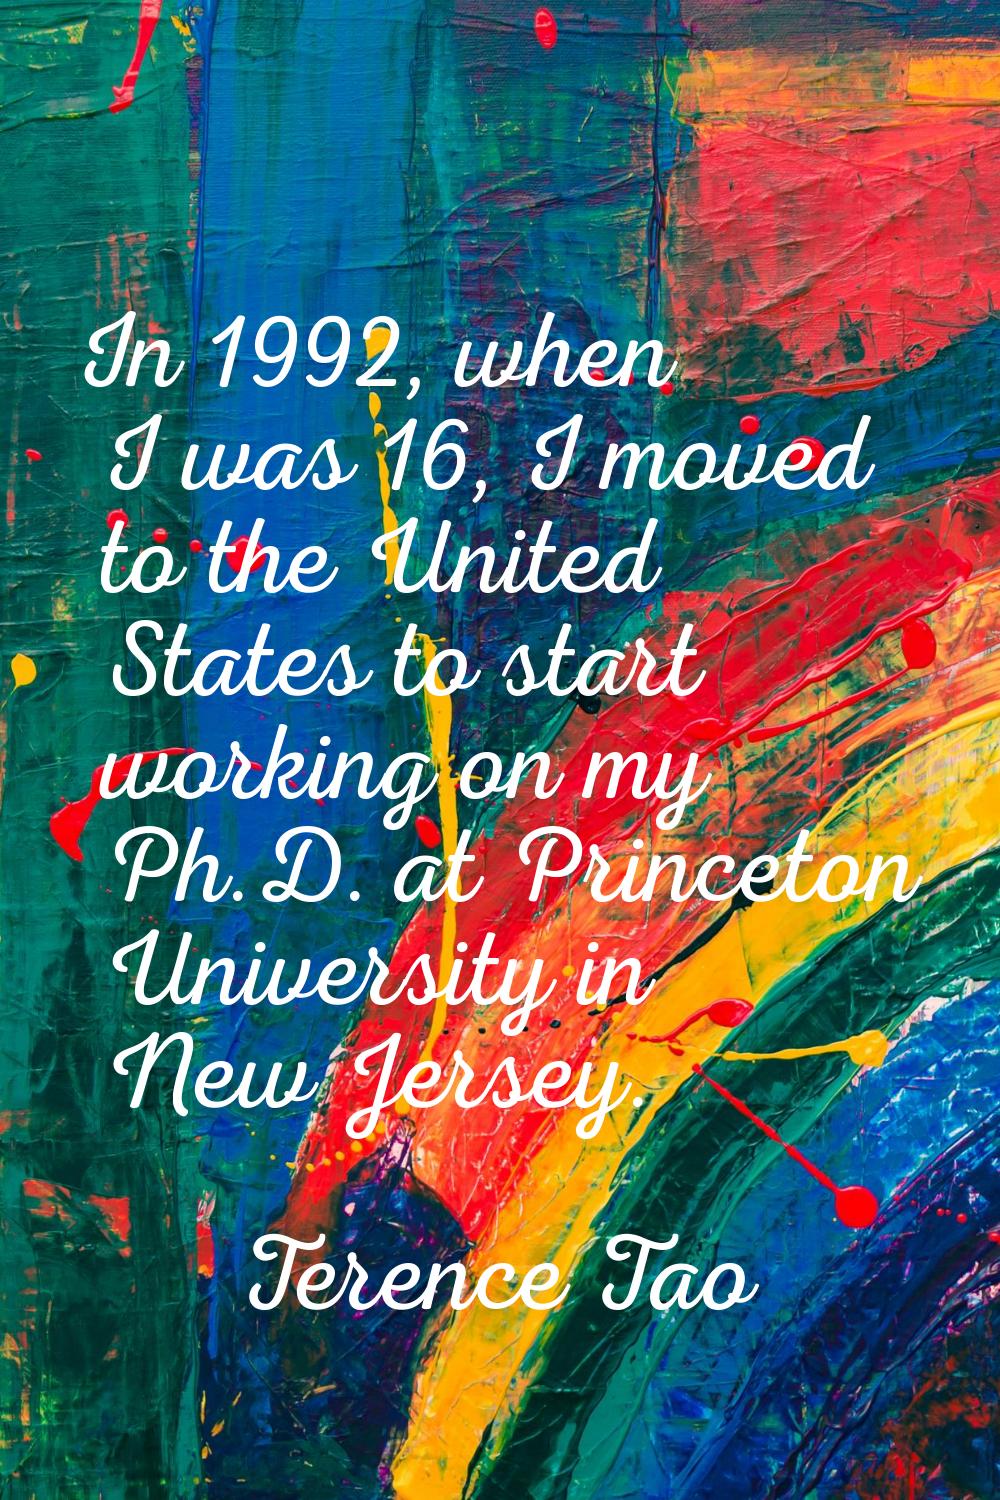 In 1992, when I was 16, I moved to the United States to start working on my Ph.D. at Princeton Univ